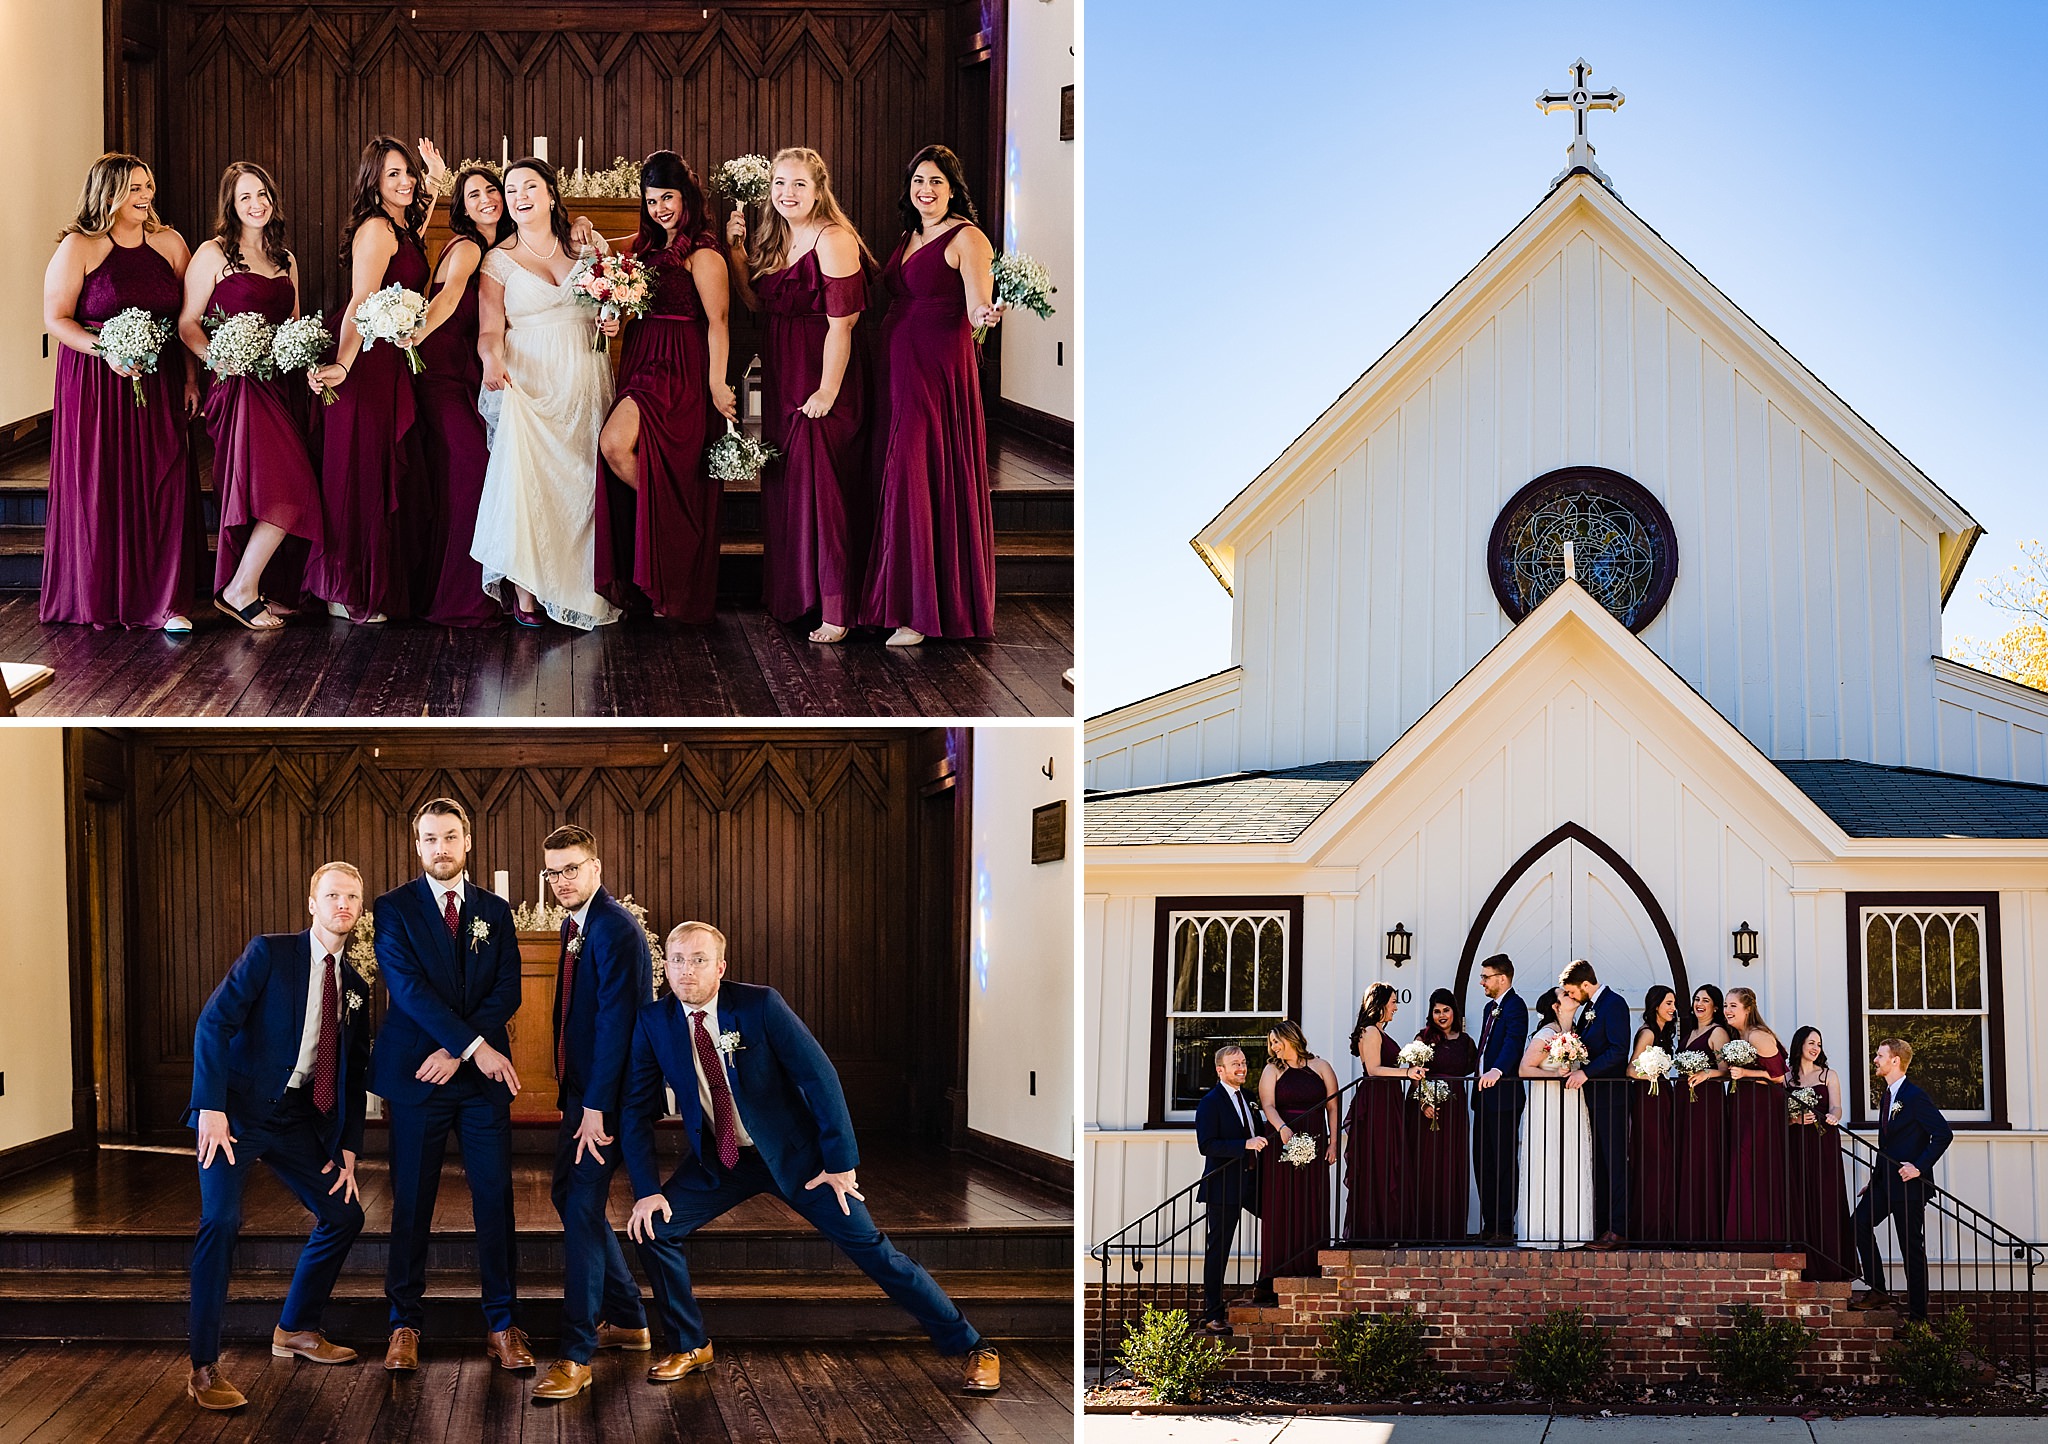 Wedding party poses in merlot colored dresses and ties at an All Saints Chapel Raleigh Wedding